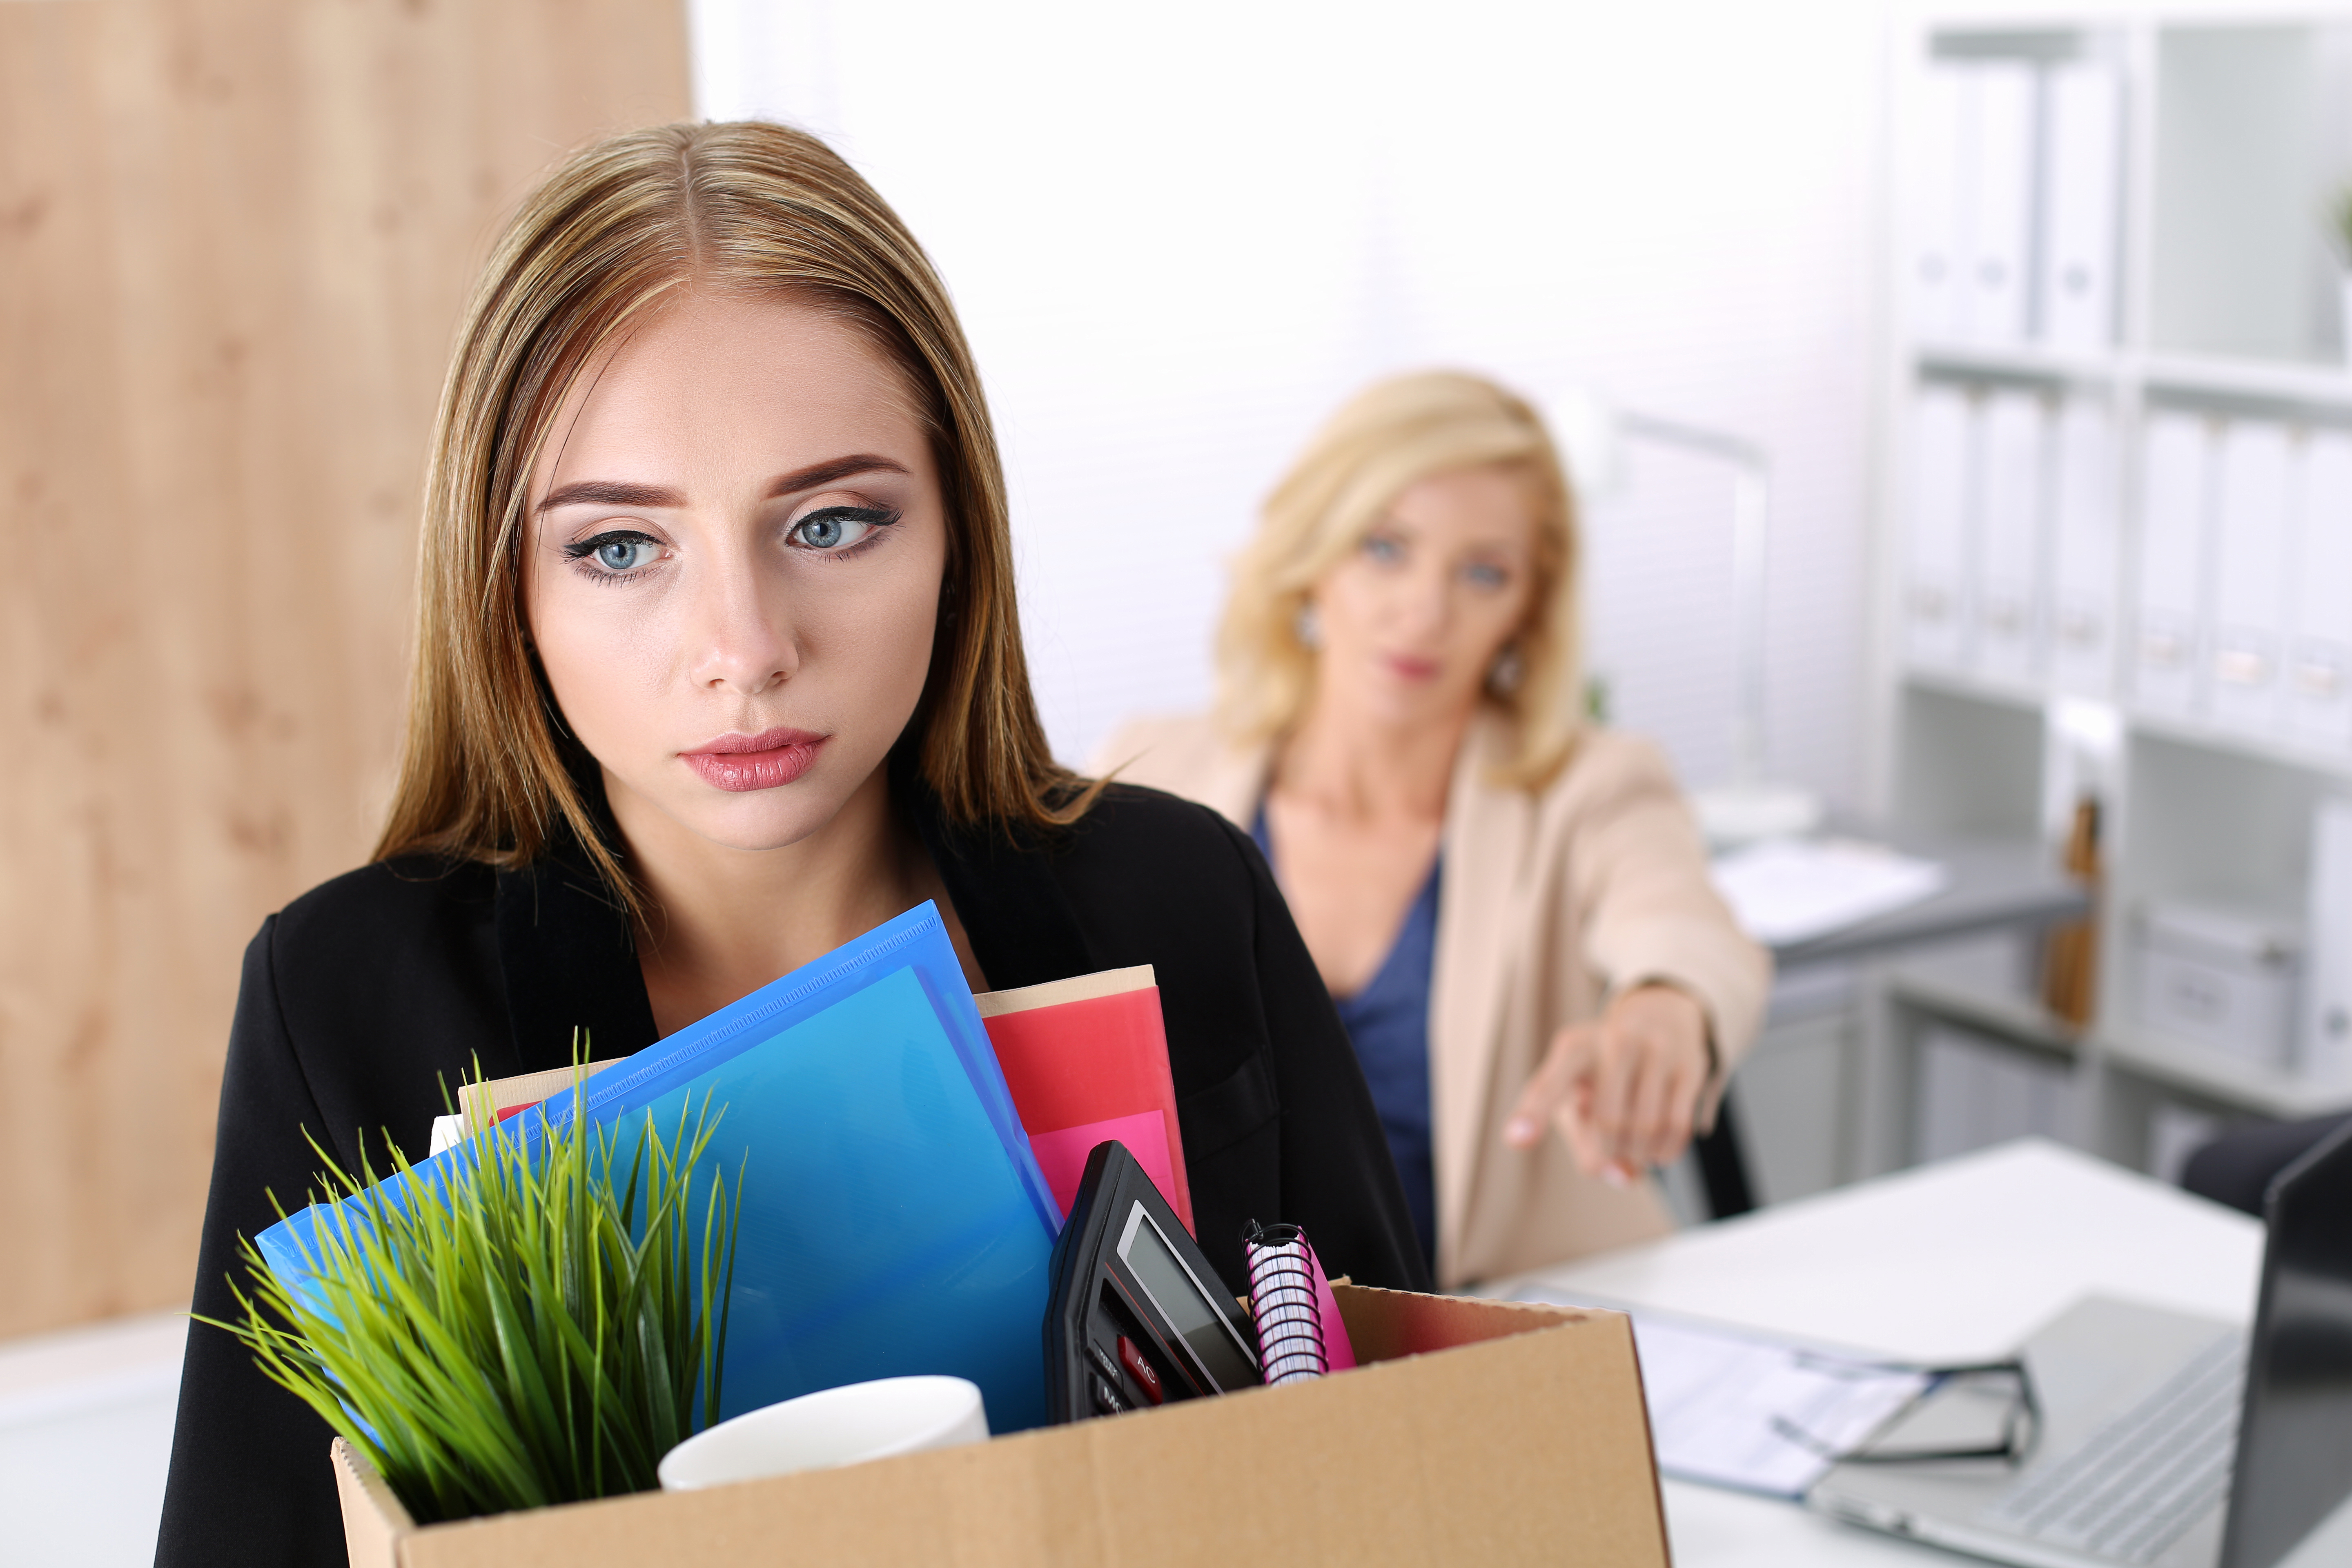 Woman being fired and taking her desk belonging out of the office in a cardboard box